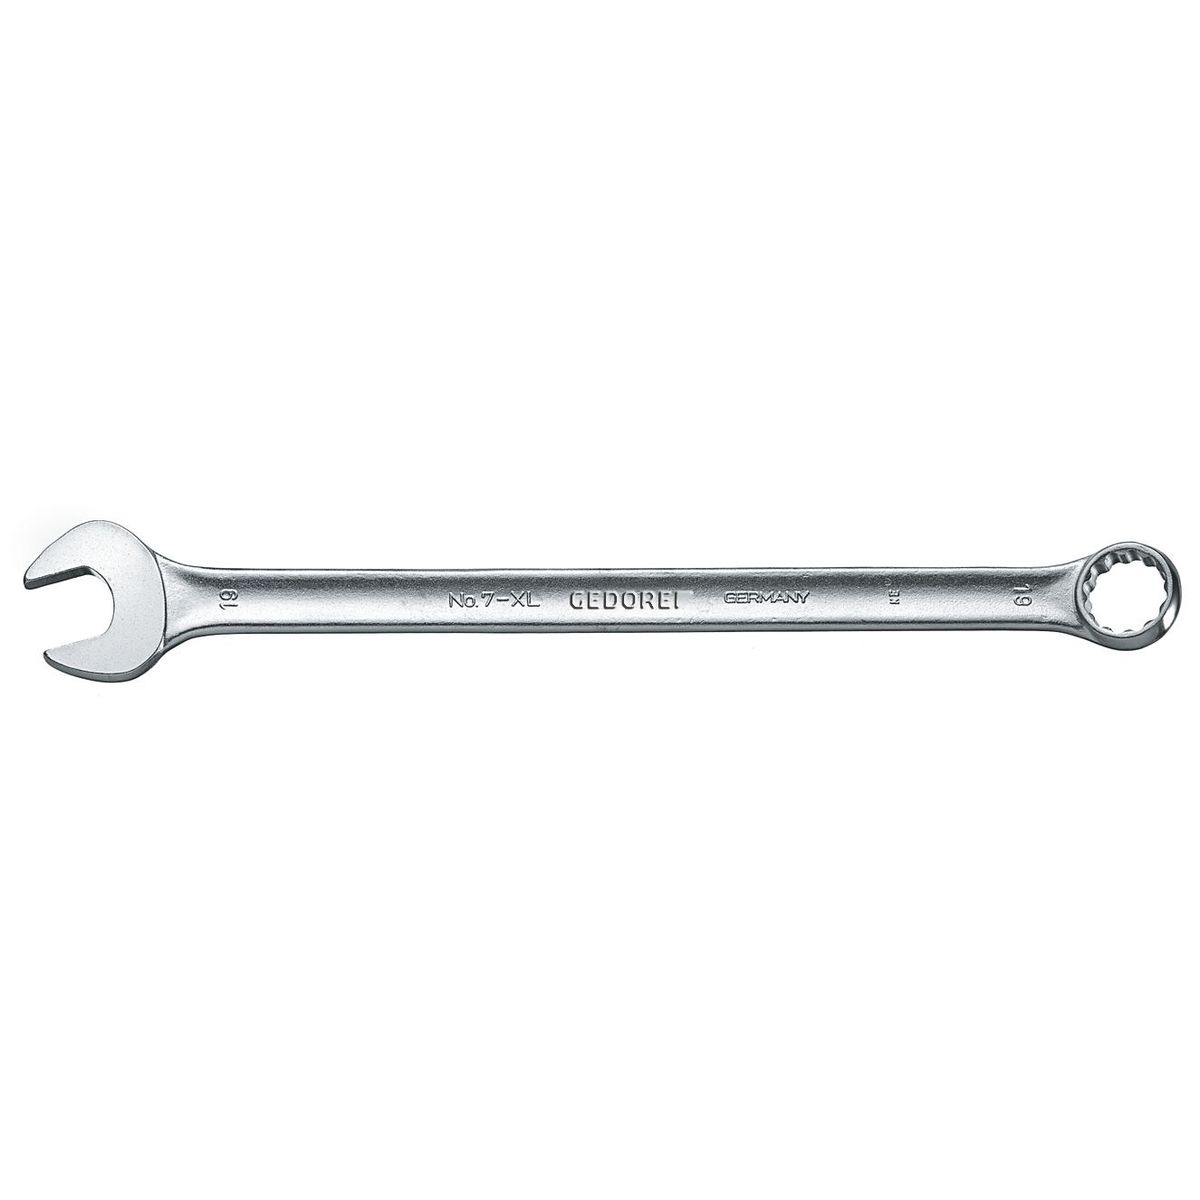 Combination spanner, extra long 27mm No.7 XL 27 Gedore